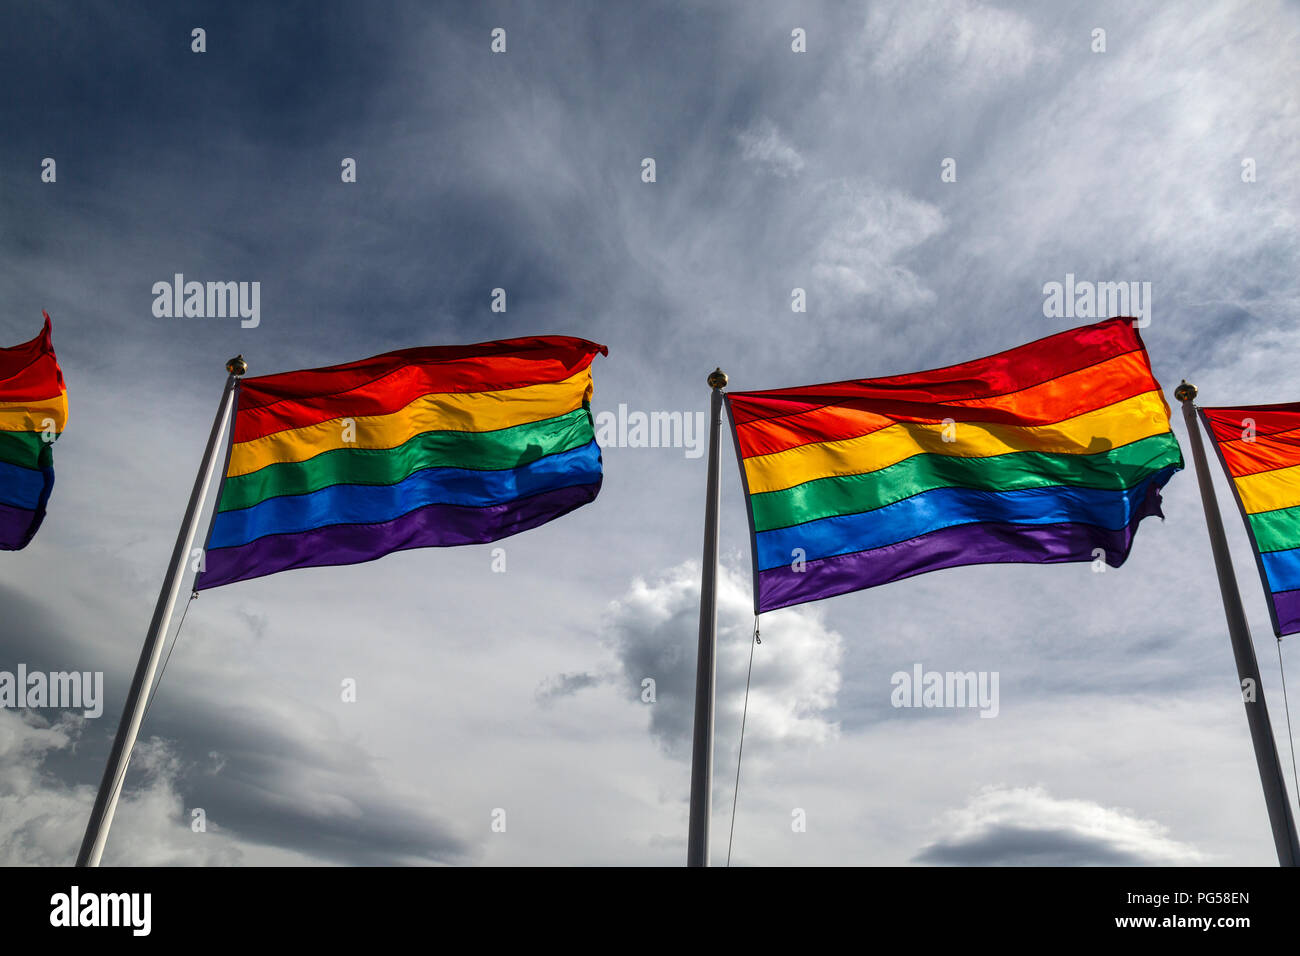 The rainbow Flag, a symbol of the gay rights movement, being flown in Reykjavik in Iceland. Stock Photo